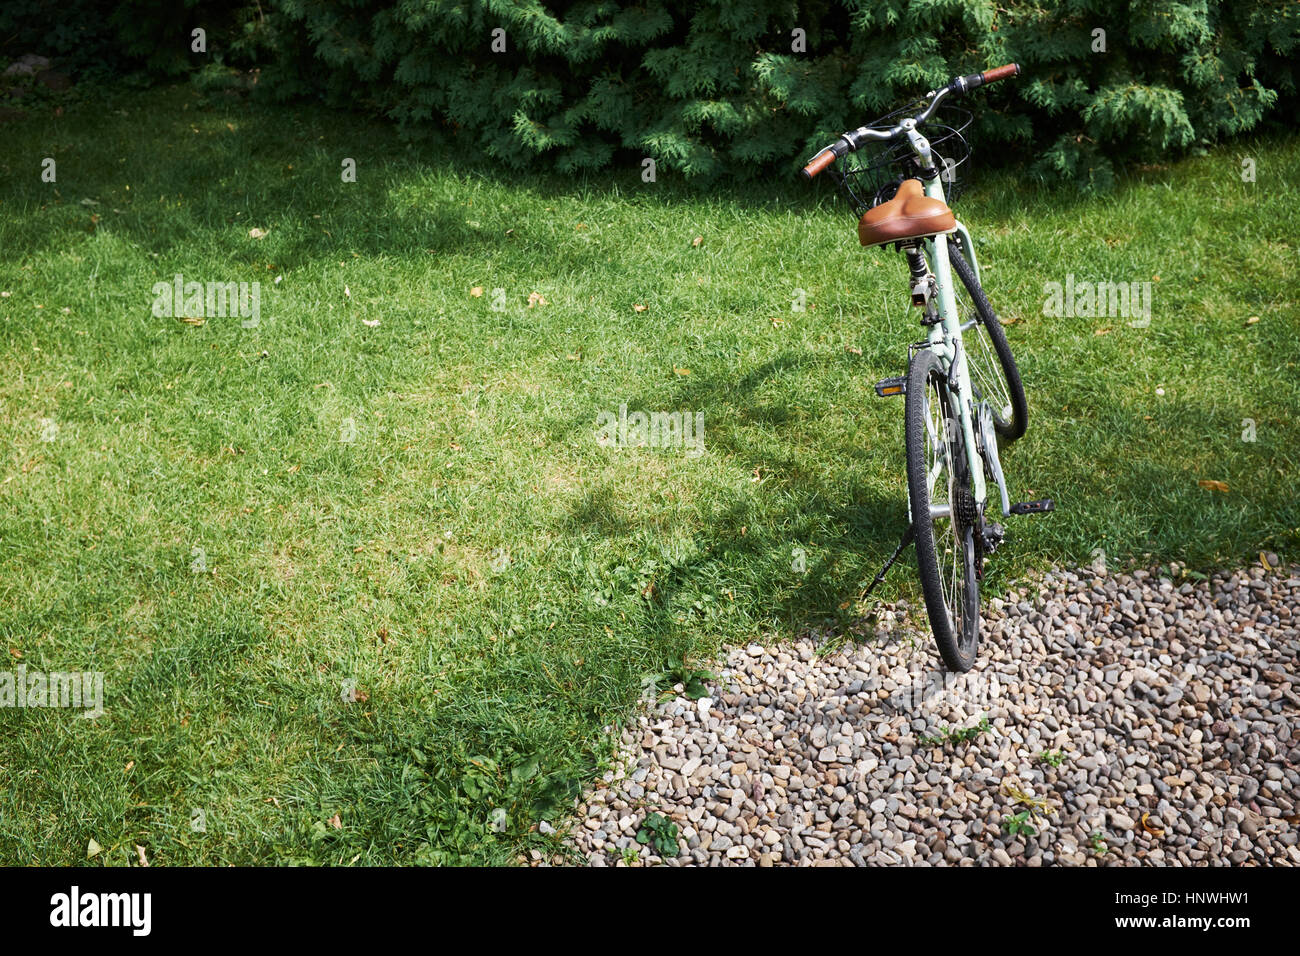 Bicycle parked on garden lawn Stock Photo